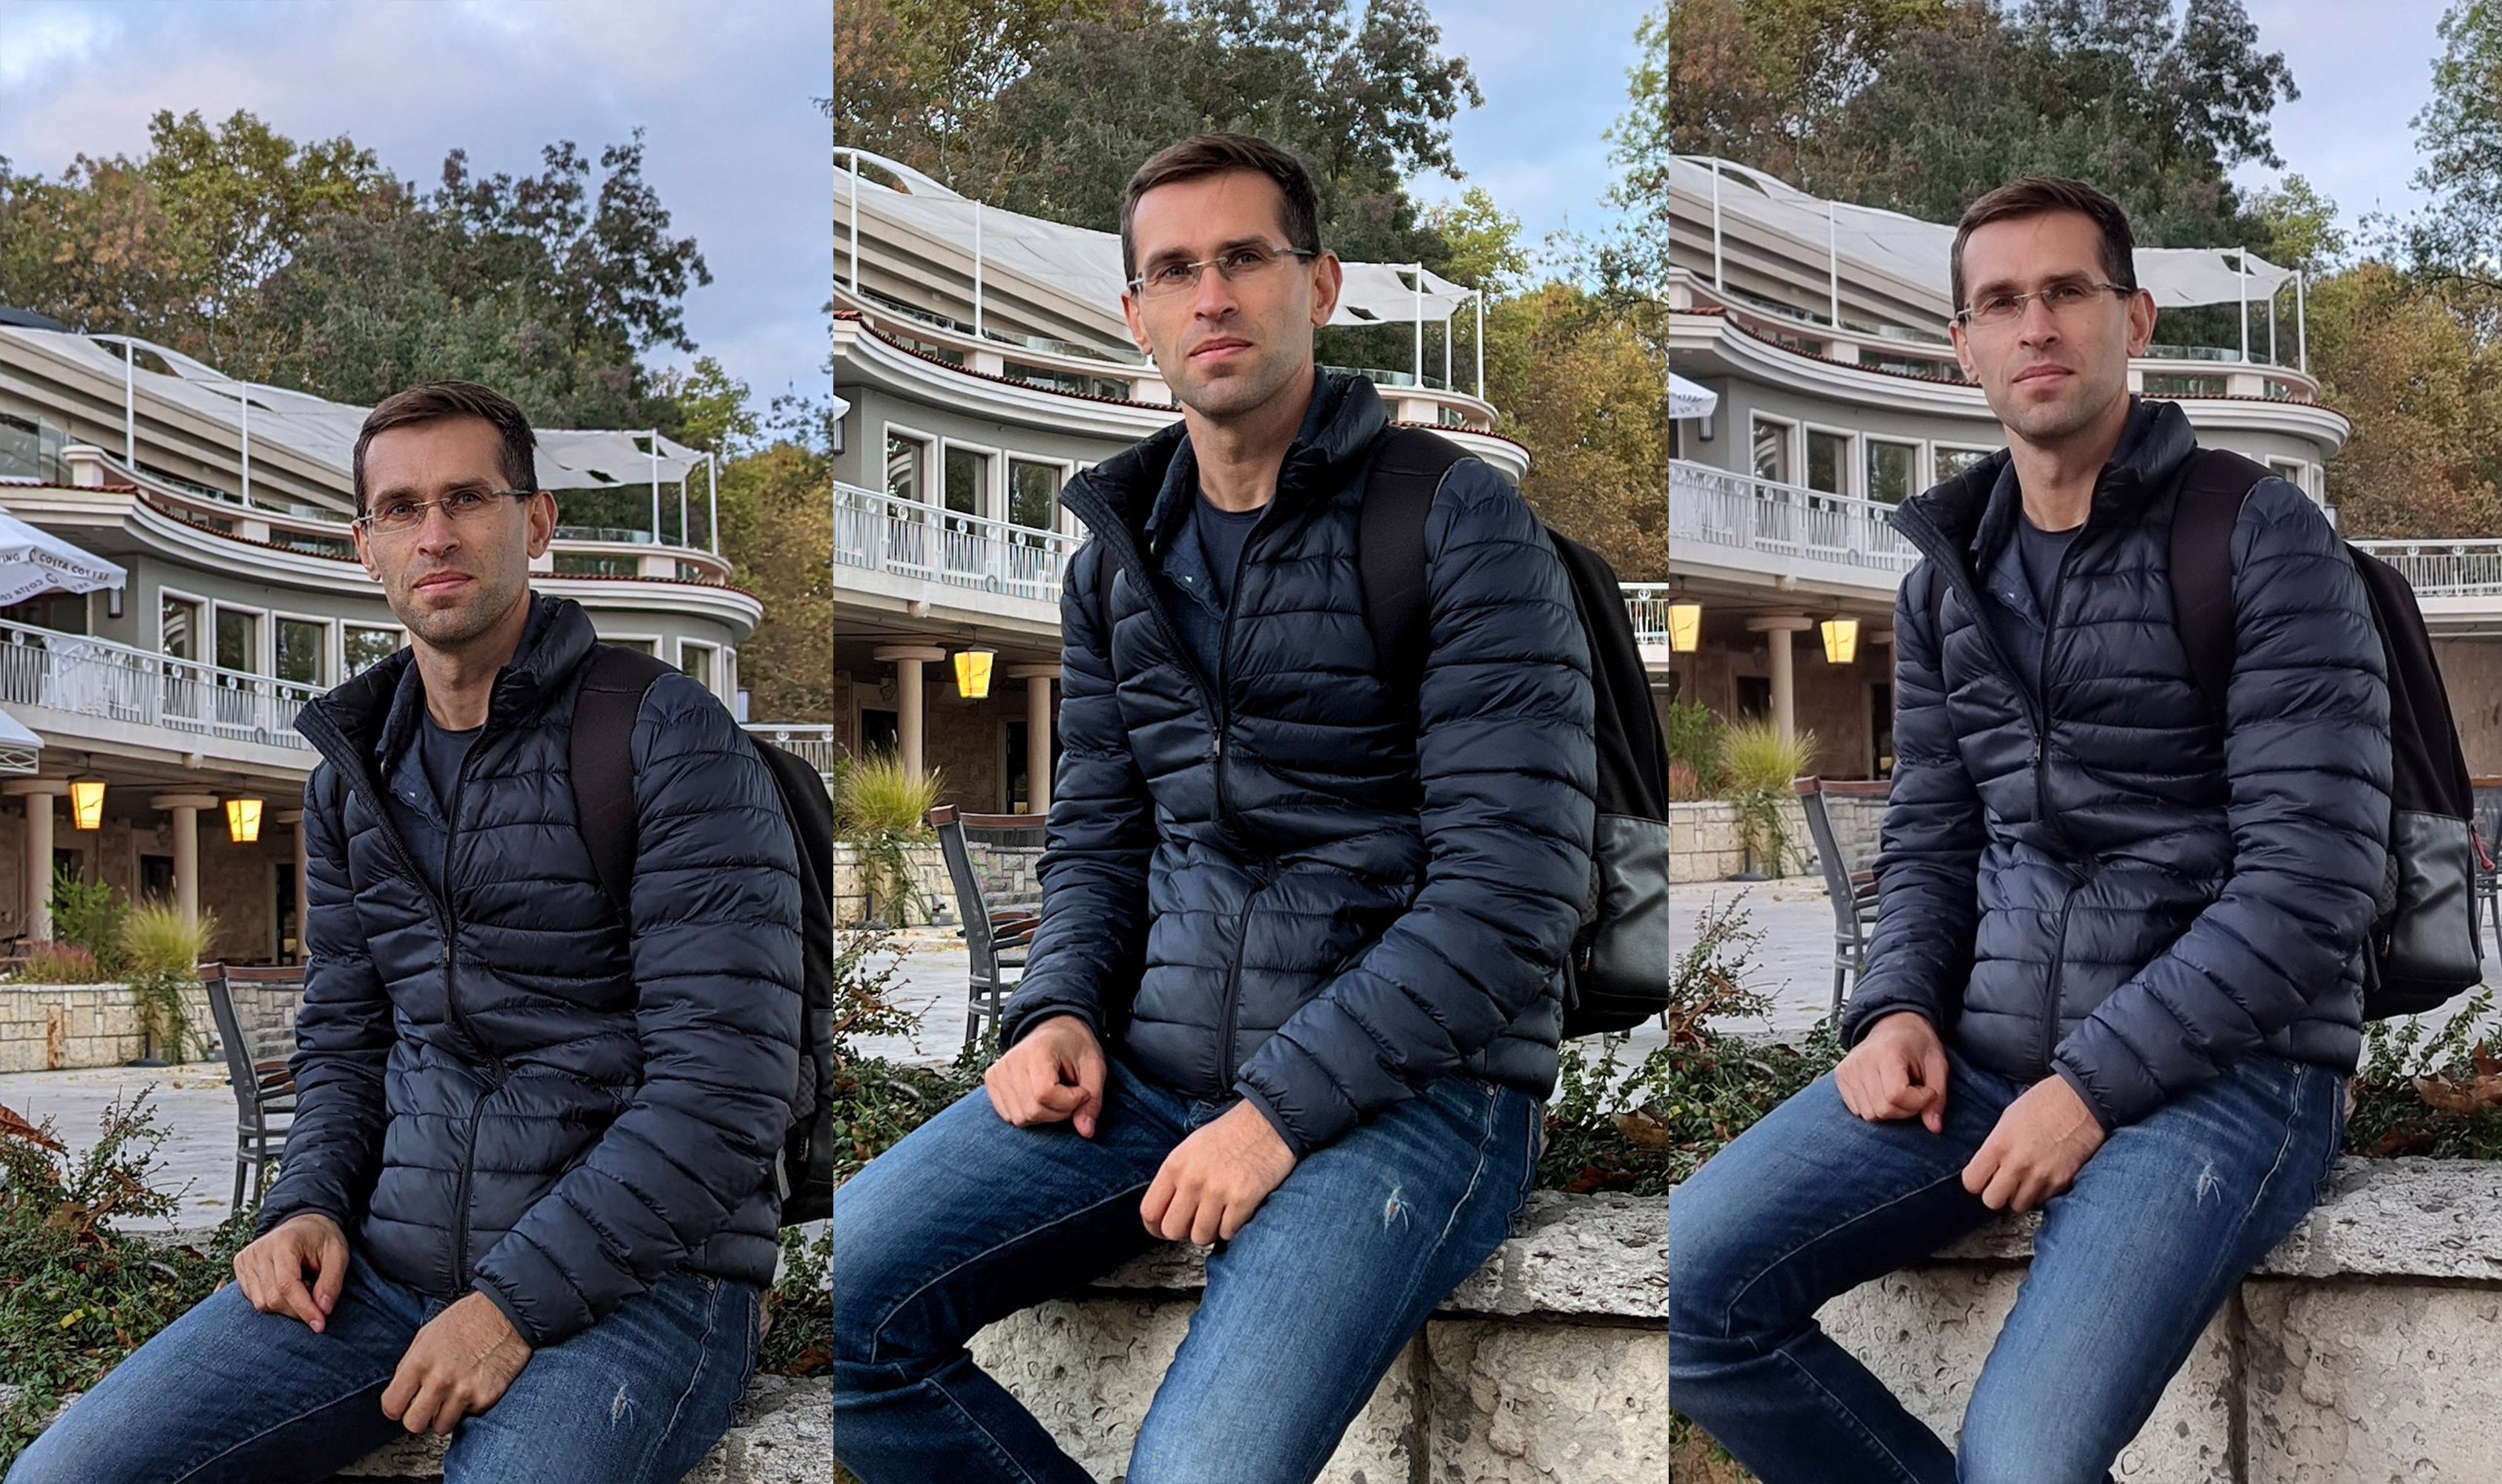 Crop from a photo, Pixel on the left, iPhone in the center, Galaxy on the right - Pixel 6 Pro vs iPhone 13 Pro Max vs Galaxy S21 Ultra: Camera Comparison